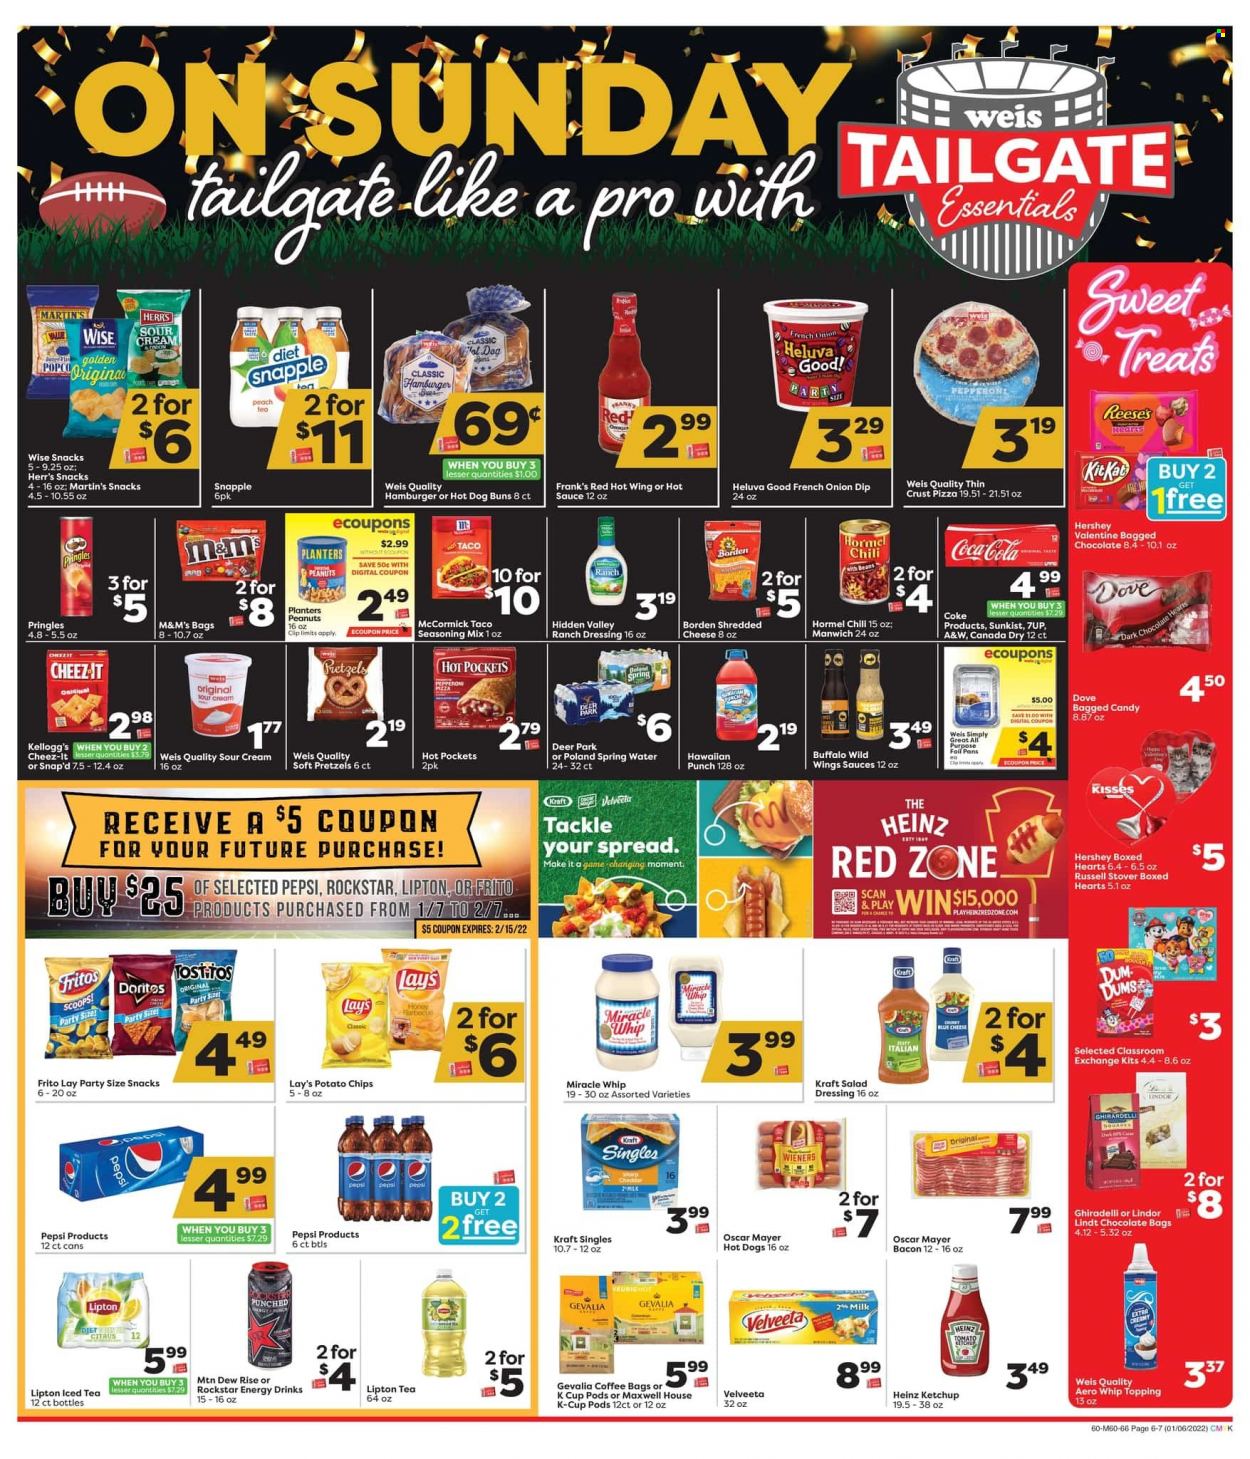 thumbnail - Weis Flyer - 01/06/2022 - 02/03/2022 - Sales products - pretzels, buns, salad, hot pocket, pizza, Kraft®, Hormel, bacon, Oscar Mayer, sandwich slices, shredded cheese, Kraft Singles, milk, sour cream, Miracle Whip, ranch dressing, dip, Reese's, chocolate, snack, Lindt, Lindor, M&M's, Kellogg's, dark chocolate, Ghirardelli, Doritos, Fritos, potato chips, Pringles, chips, Lay’s, Cheez-It, topping, Heinz, Manwich, spice, hot sauce, ketchup, dressing, honey, peanuts, Planters, Canada Dry, Coca-Cola, Mountain Dew, Pepsi, energy drink, Lipton, ice tea, 7UP, Snapple, A&W, Rockstar, spring water, Maxwell House, coffee, coffee capsules, K-Cups, Gevalia, Dove. Page 6.